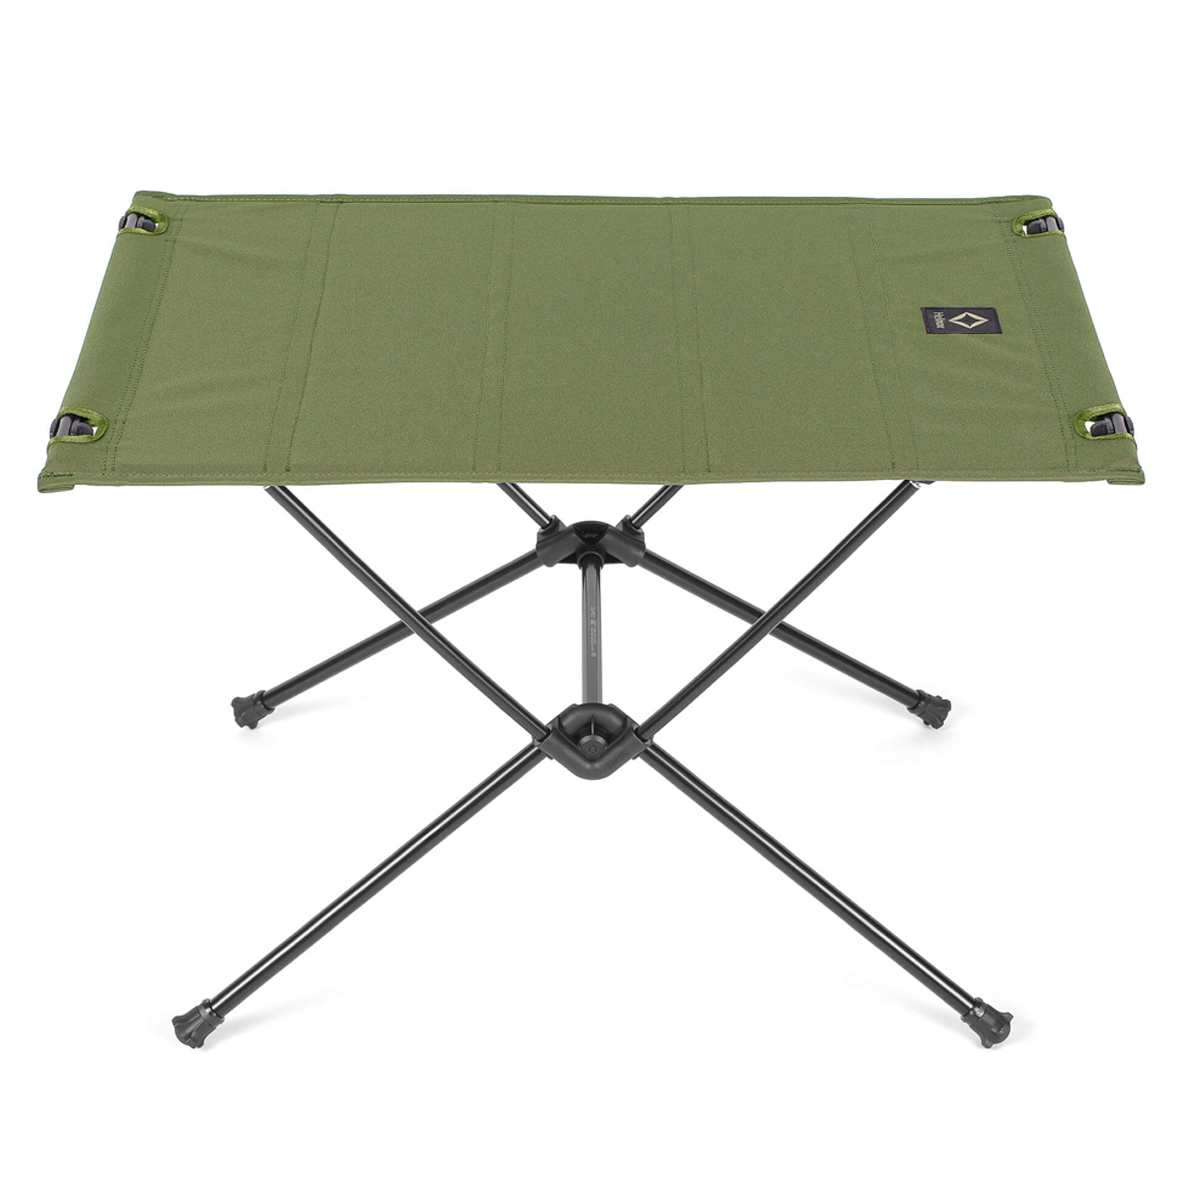 Helinox Tactical Table Regular Military Olive, portable, lightweight table